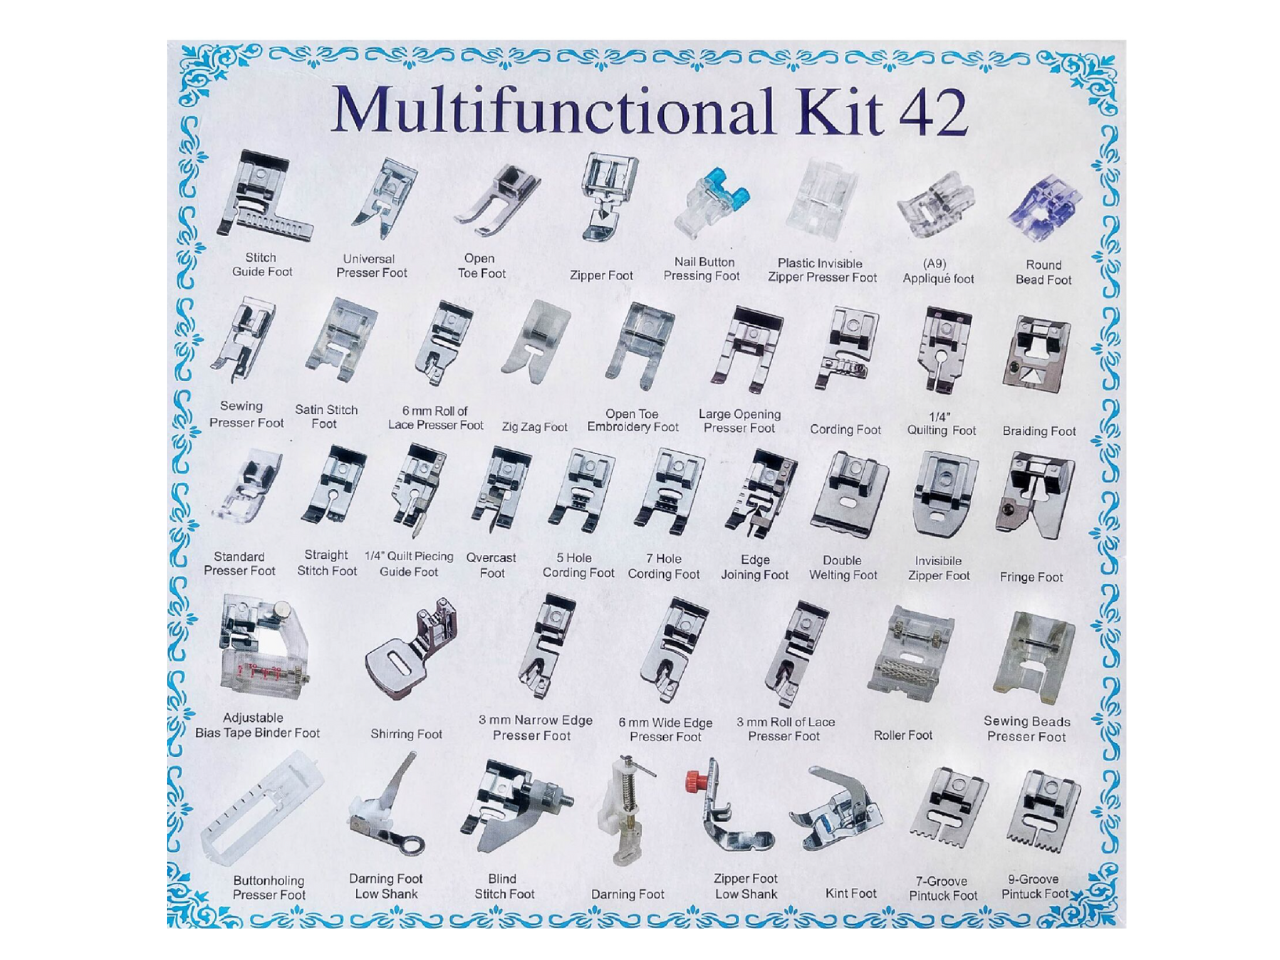 SINGER 42 Piece Sewing Machine Accessory Foot Set